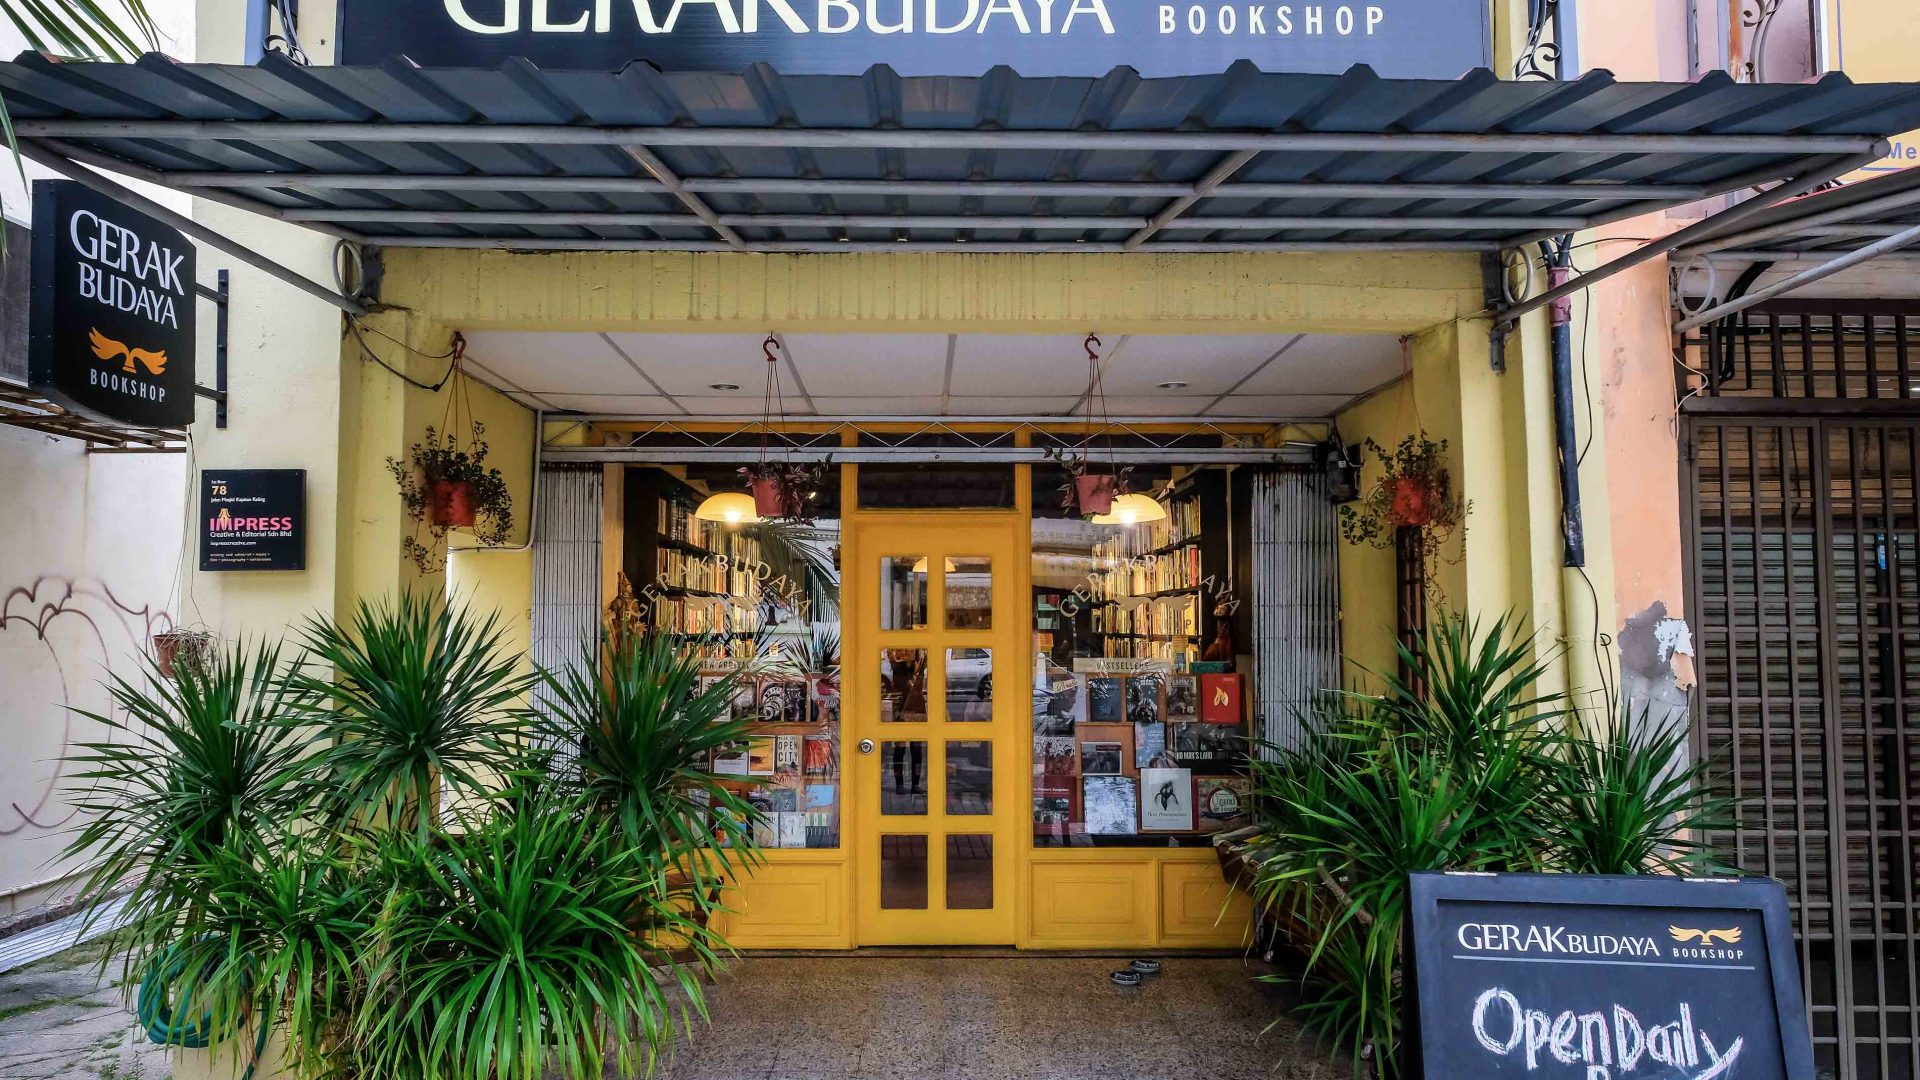 Gerakbudaya Bookshop is a meeting point, where writers, artists, musicians and other George Town creatives converge.